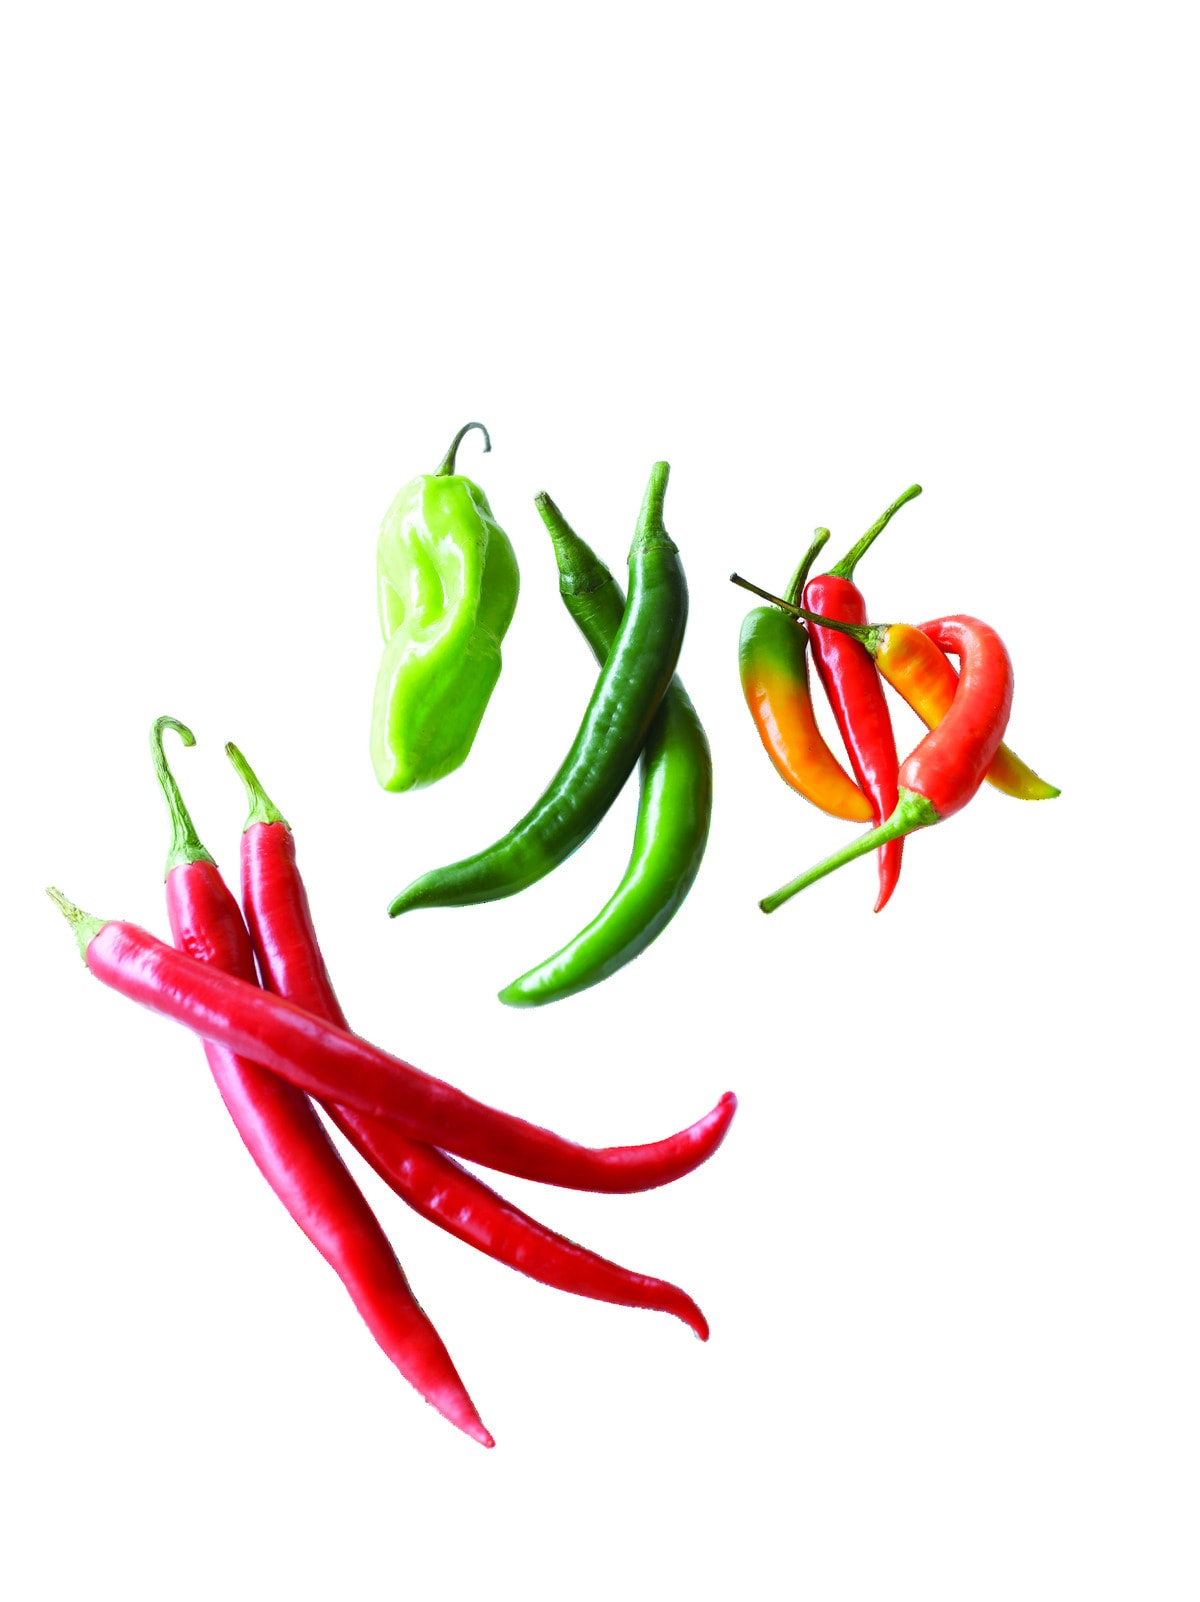 Your guide to chillies - Healthy Food Guide